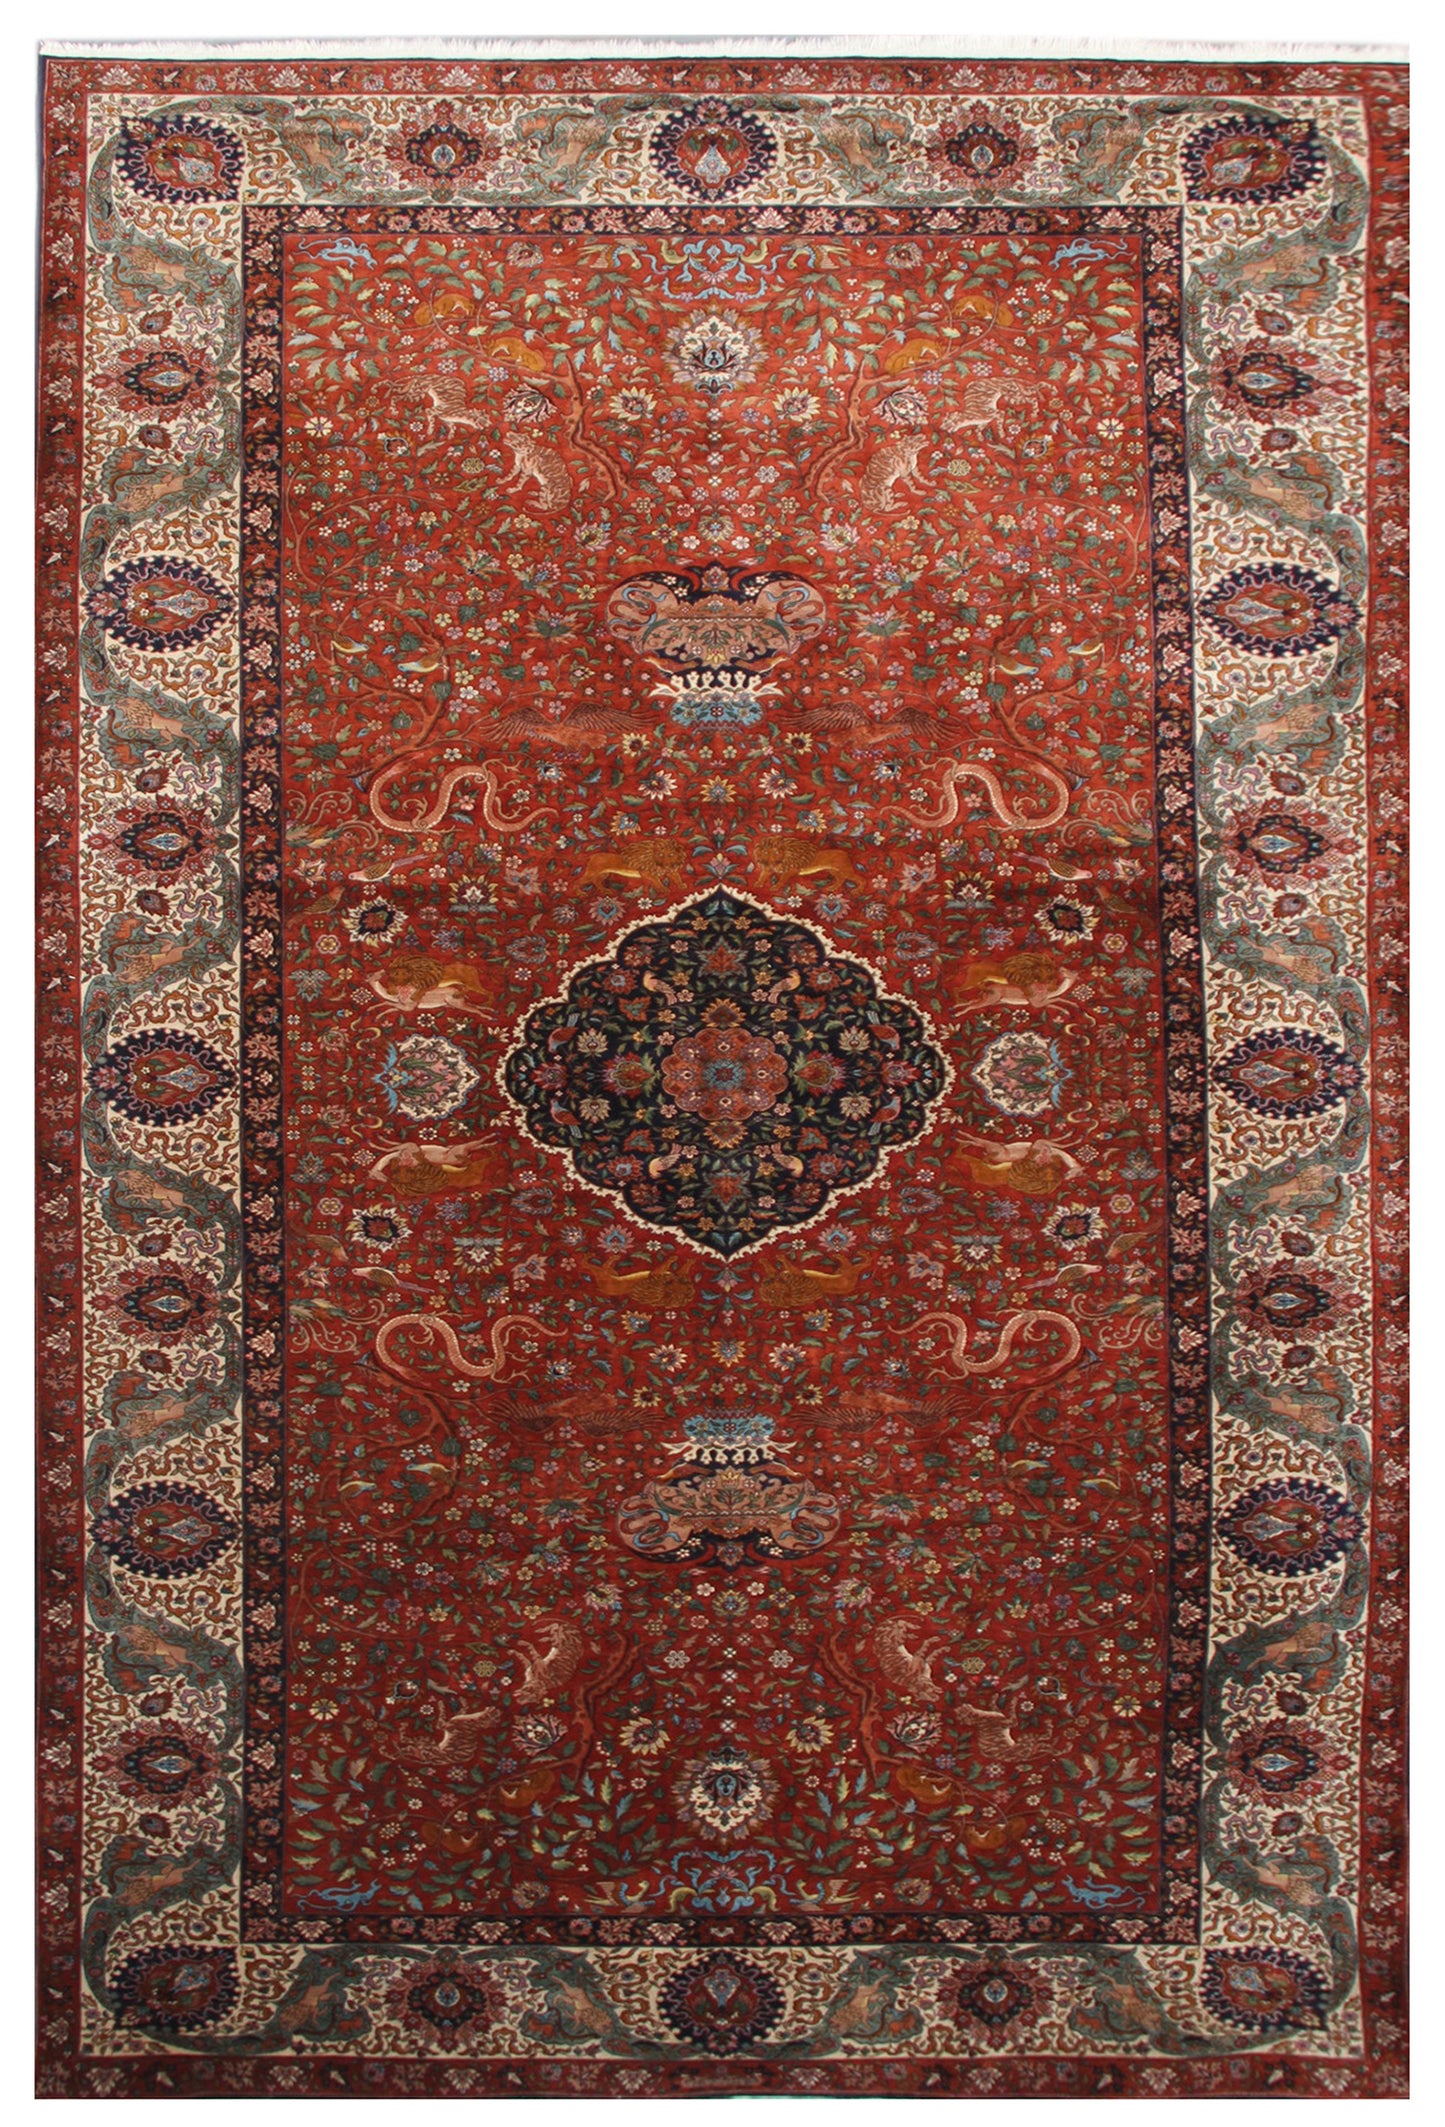 9'x18' Rust Blue Ivory Hunting Design Persian Kashan Style Rug